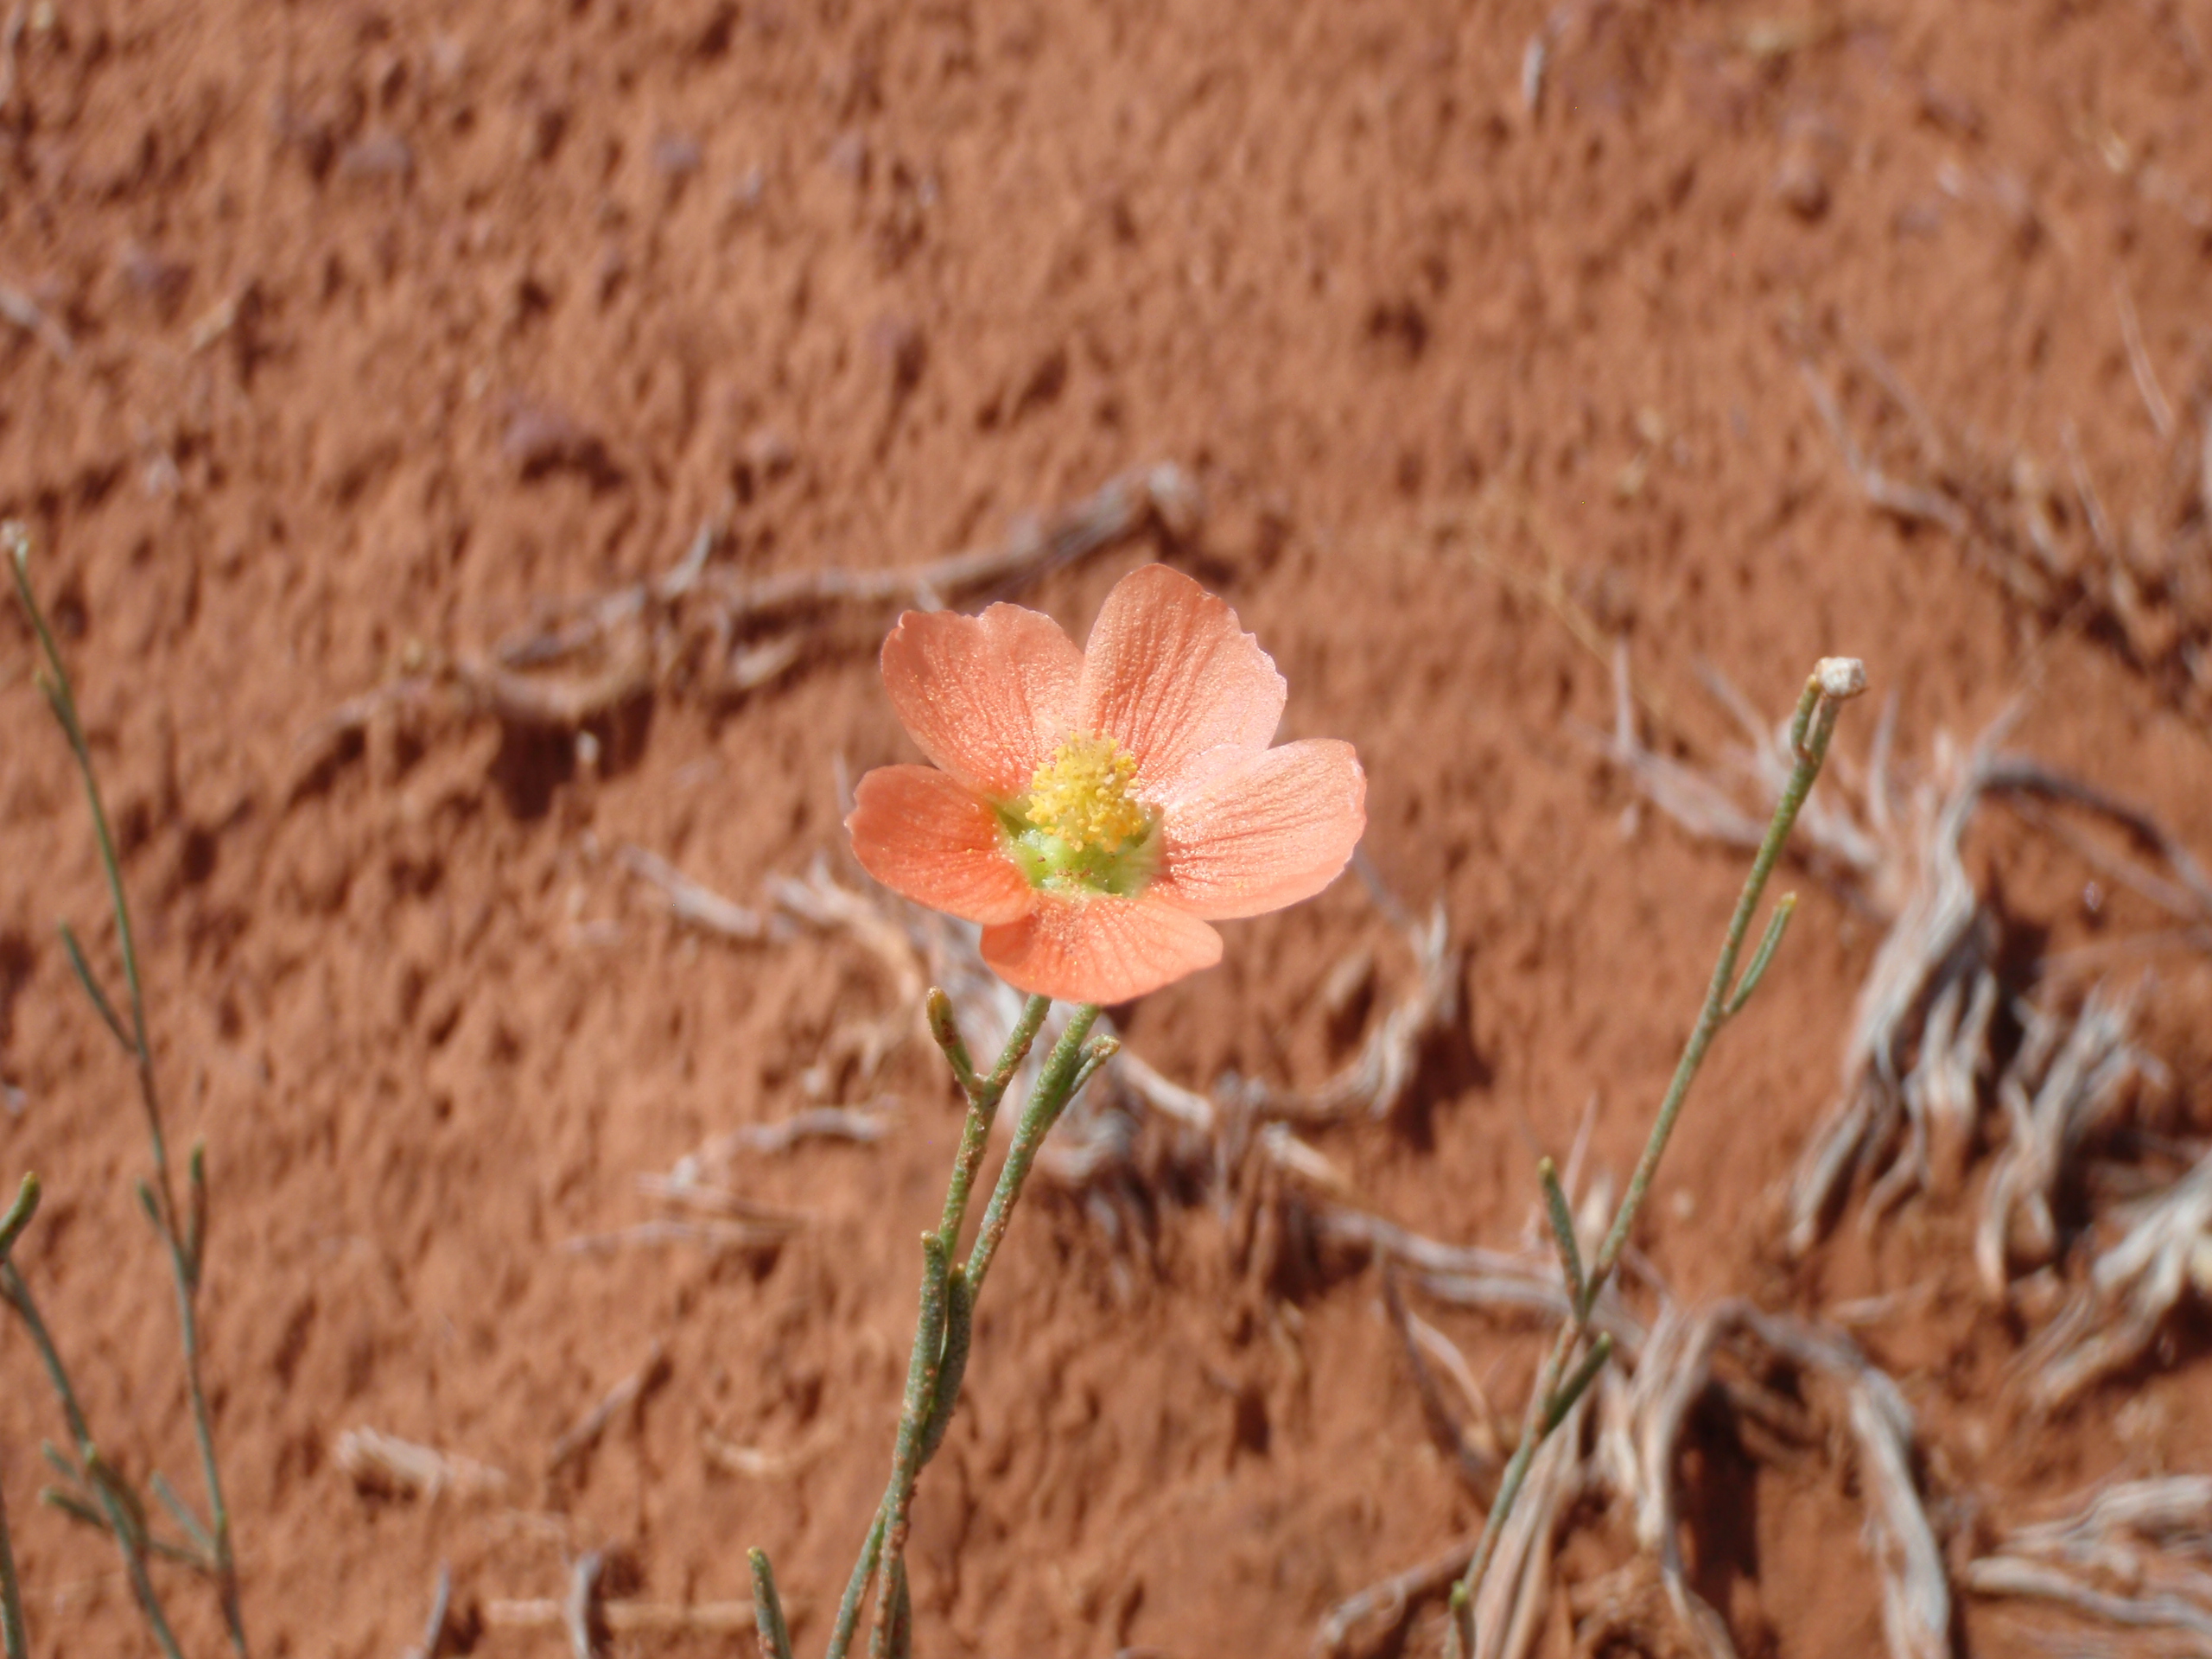 Open blossom with five red-orange petals that are yellow toward the center of the flower.